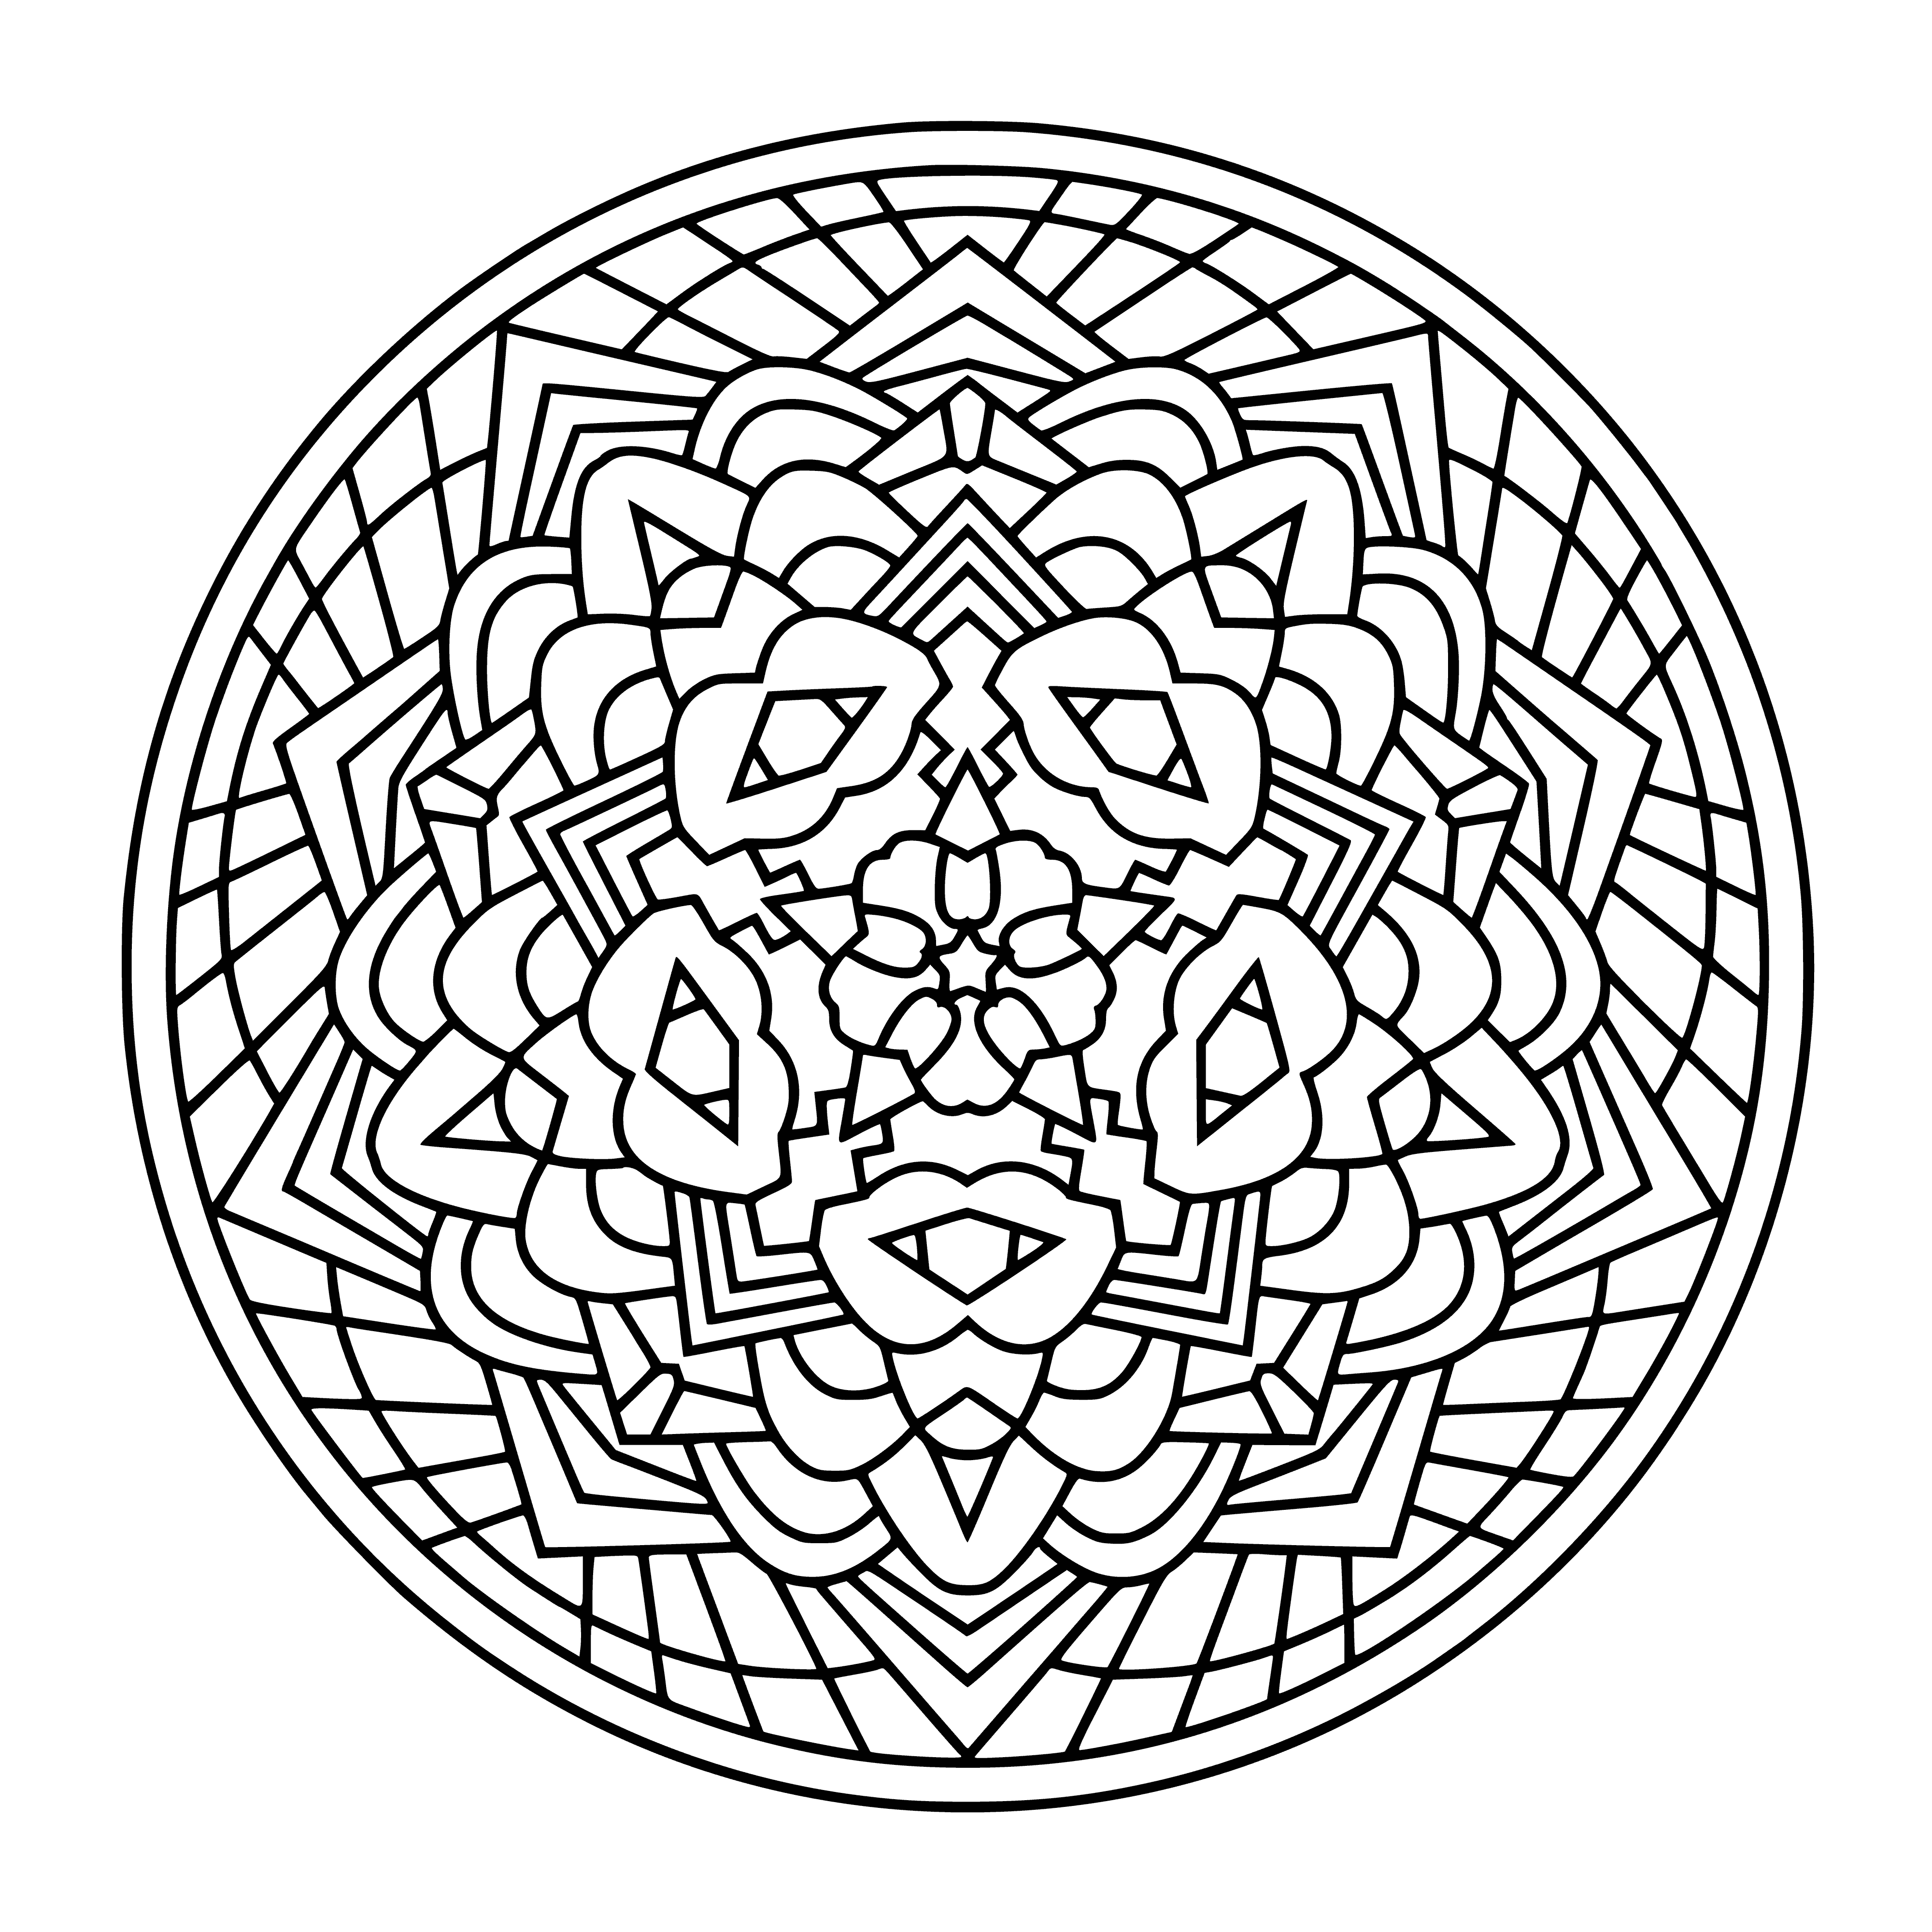 coloring page: Radial symmetrical designs in a circle full of busy patterns & shapes. Connecting it all is a central circle in a variety of colors. #art